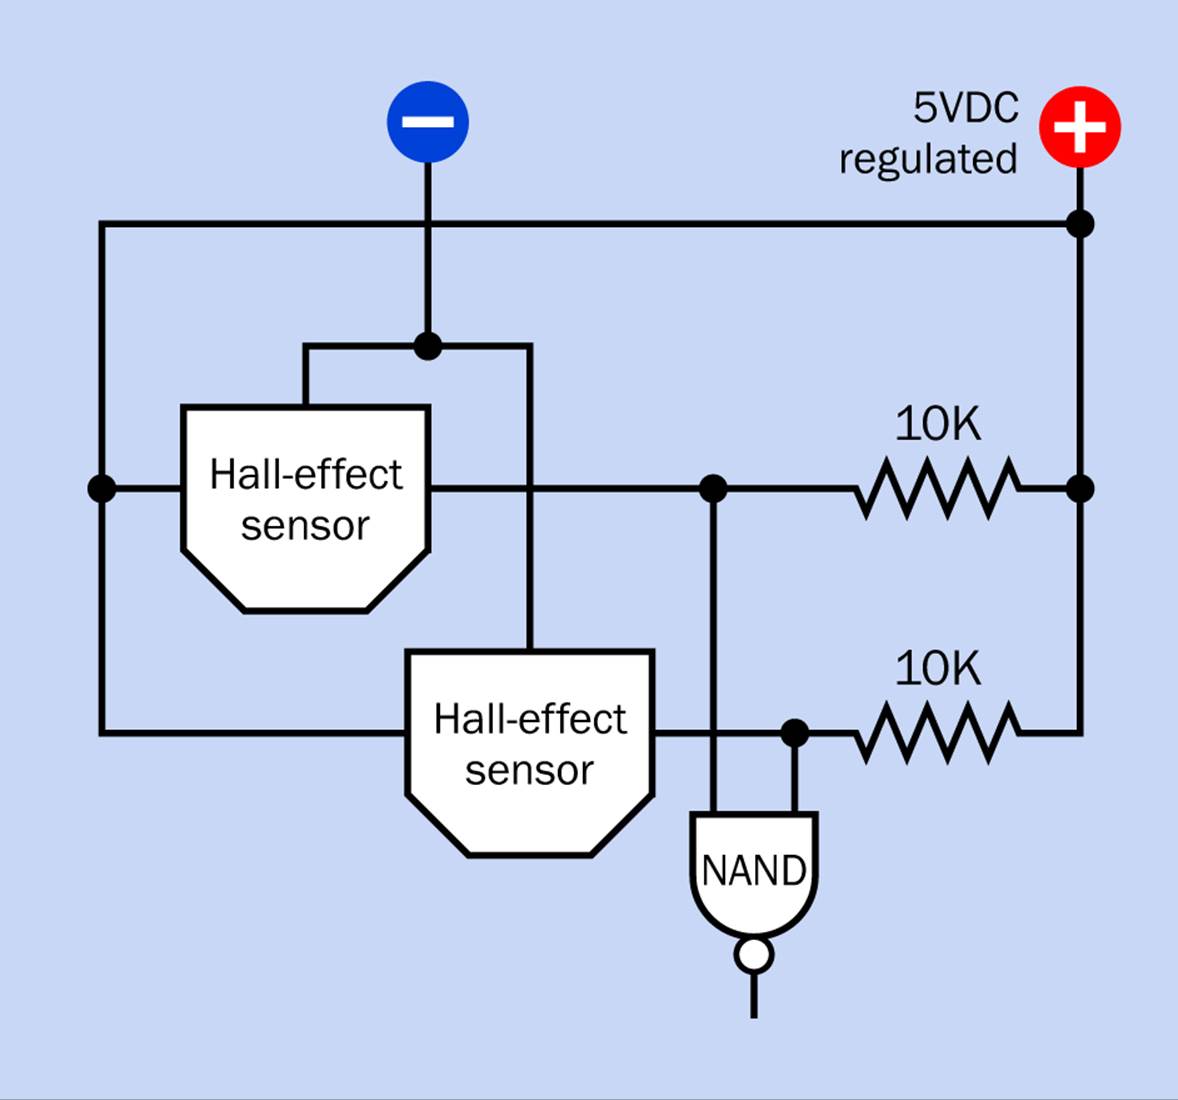 The NAND gate in this circuit will have a normally-low output that only goes high when either or both of the Hall sensors are activated.